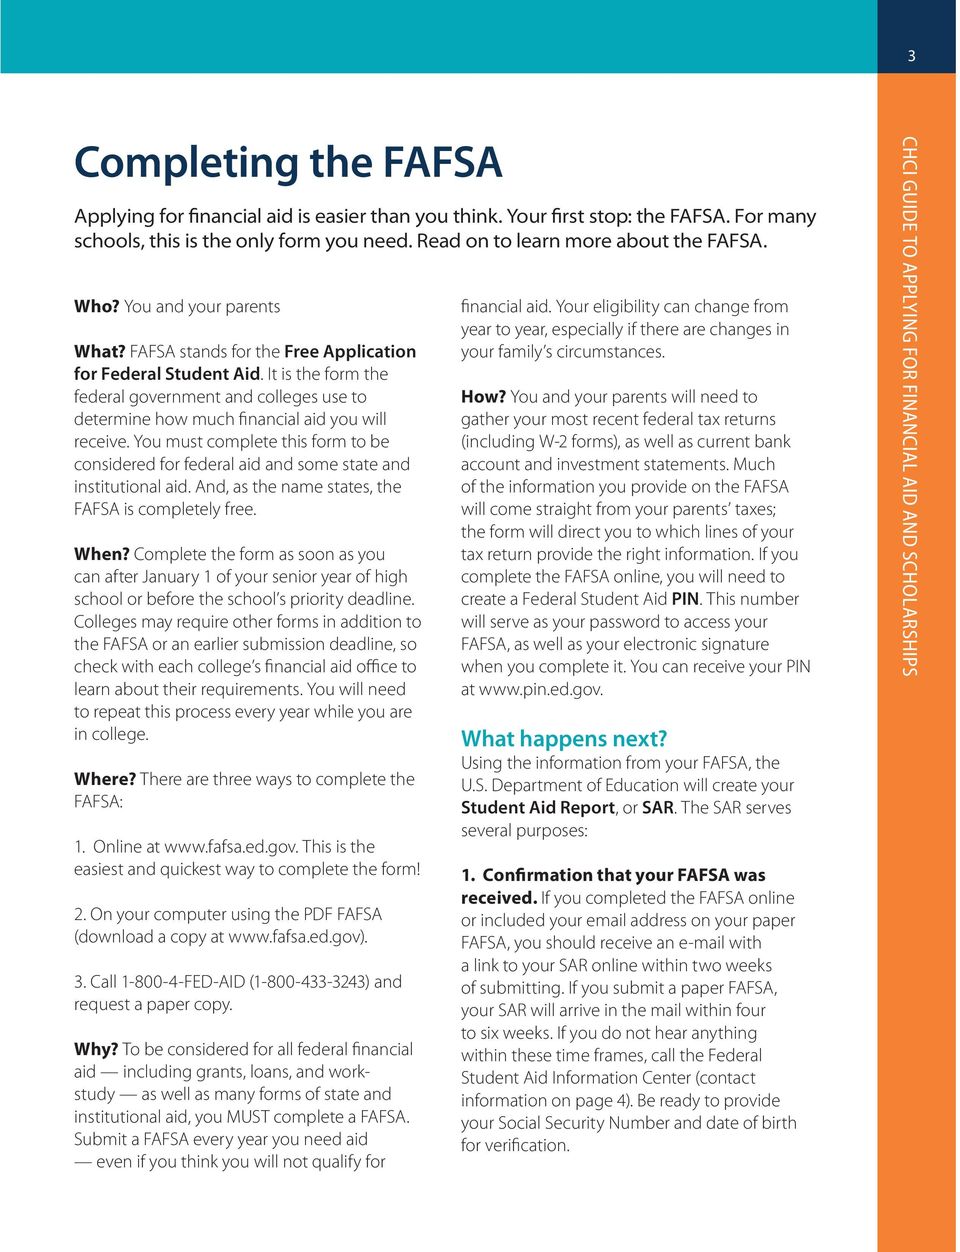 You must complete this form to be considered for federal aid and some state and institutional aid. And, as the name states, the FAFSA is completely free. When?